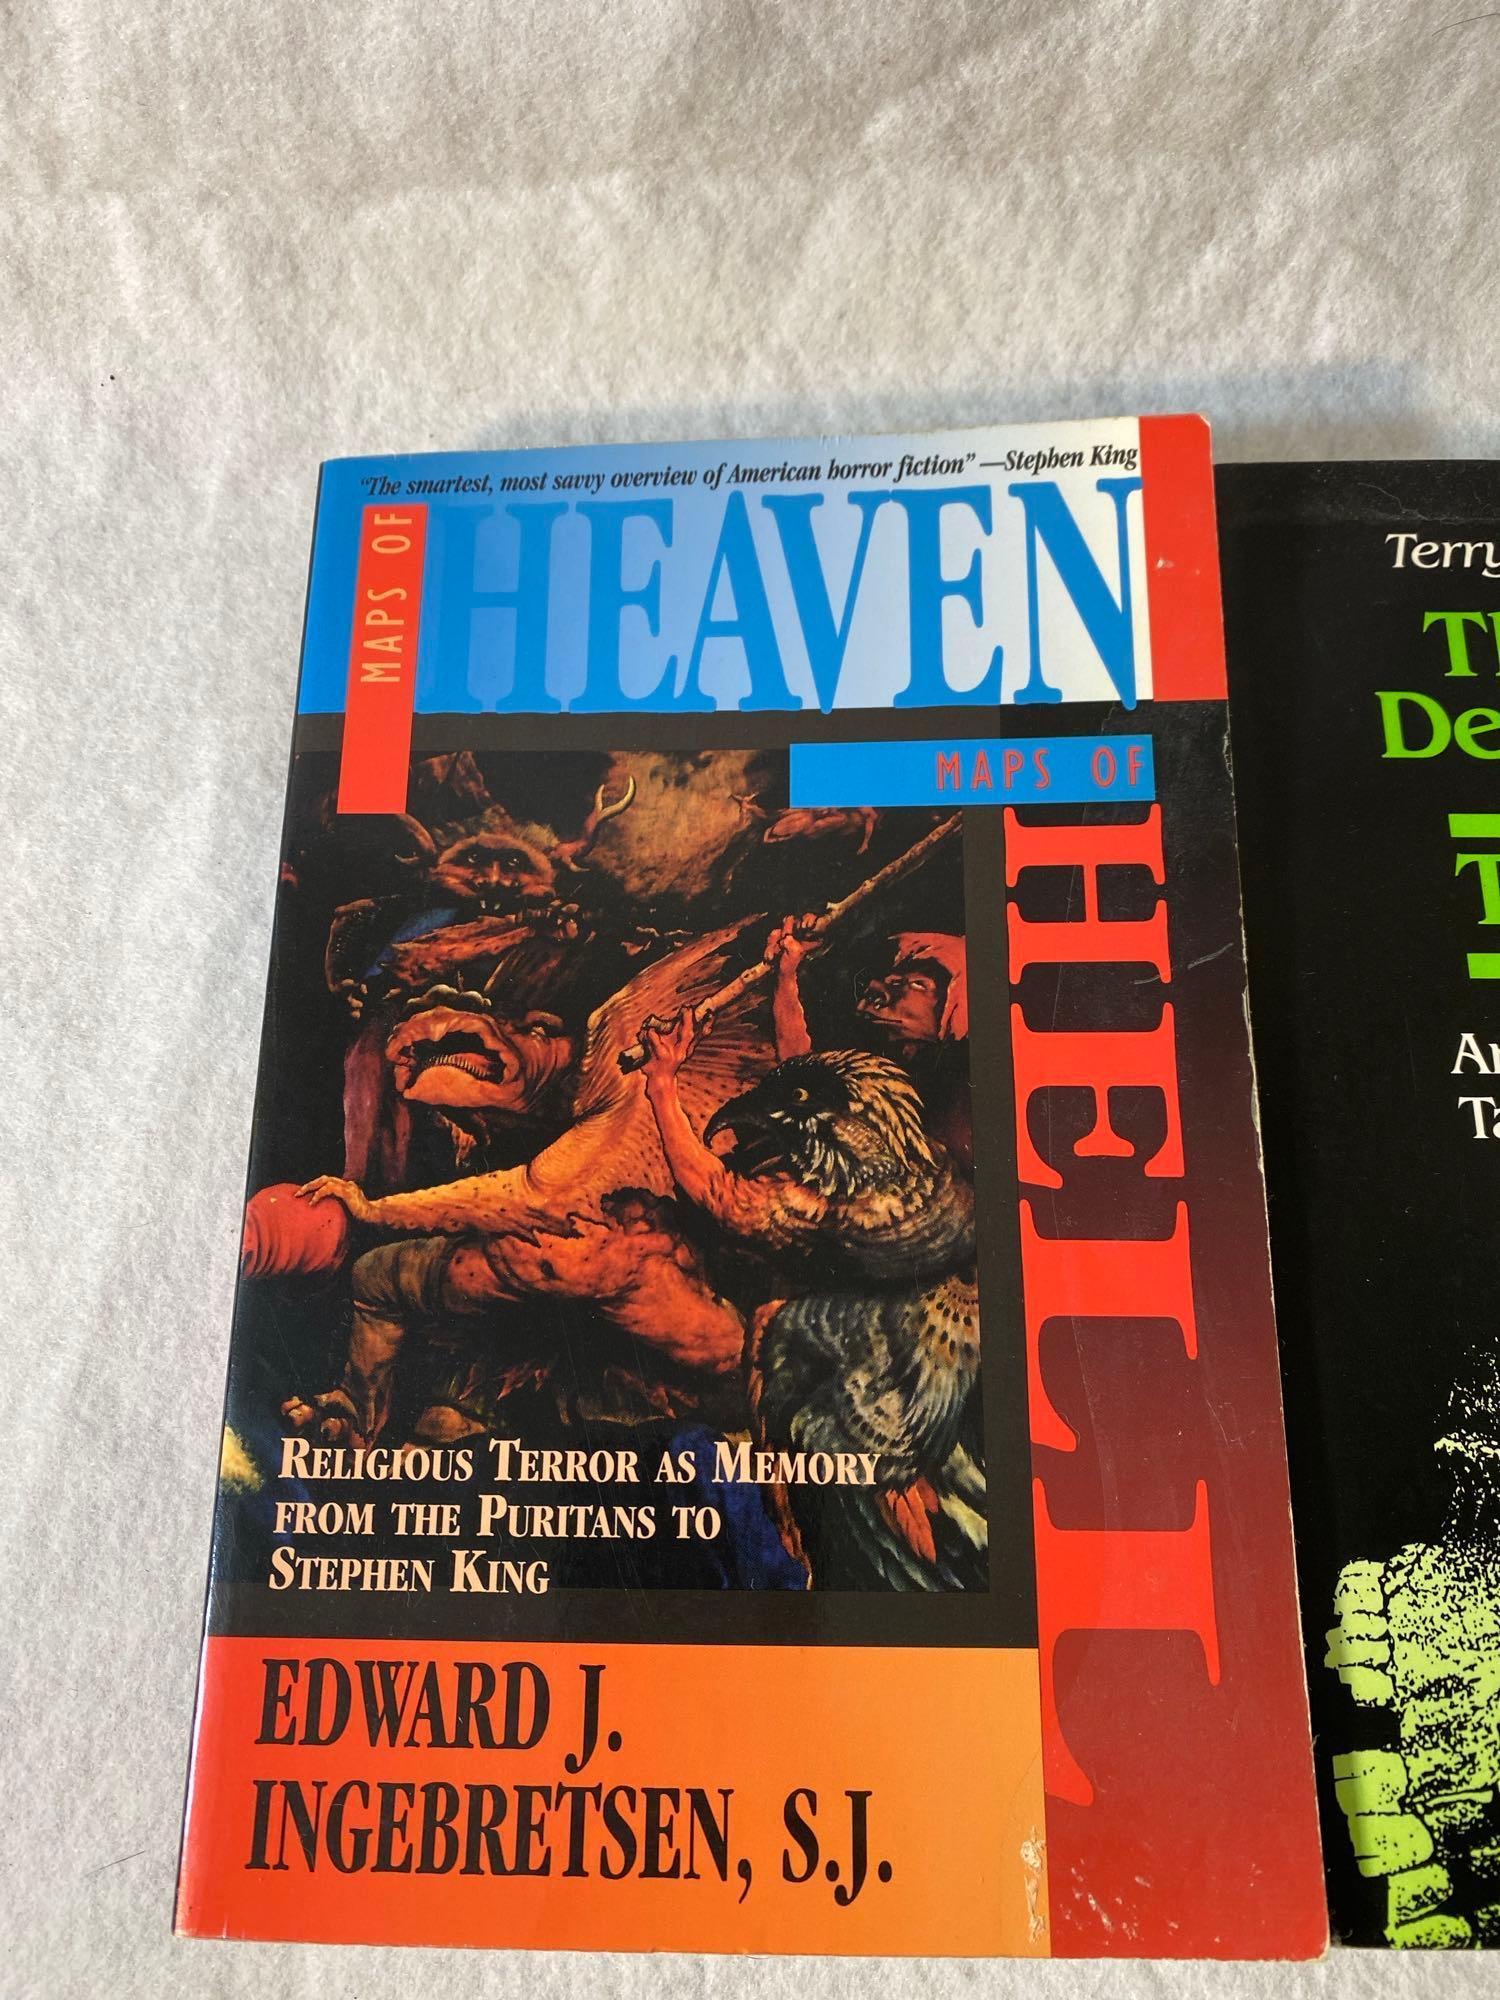 Six Assorted Horror Commentary Books